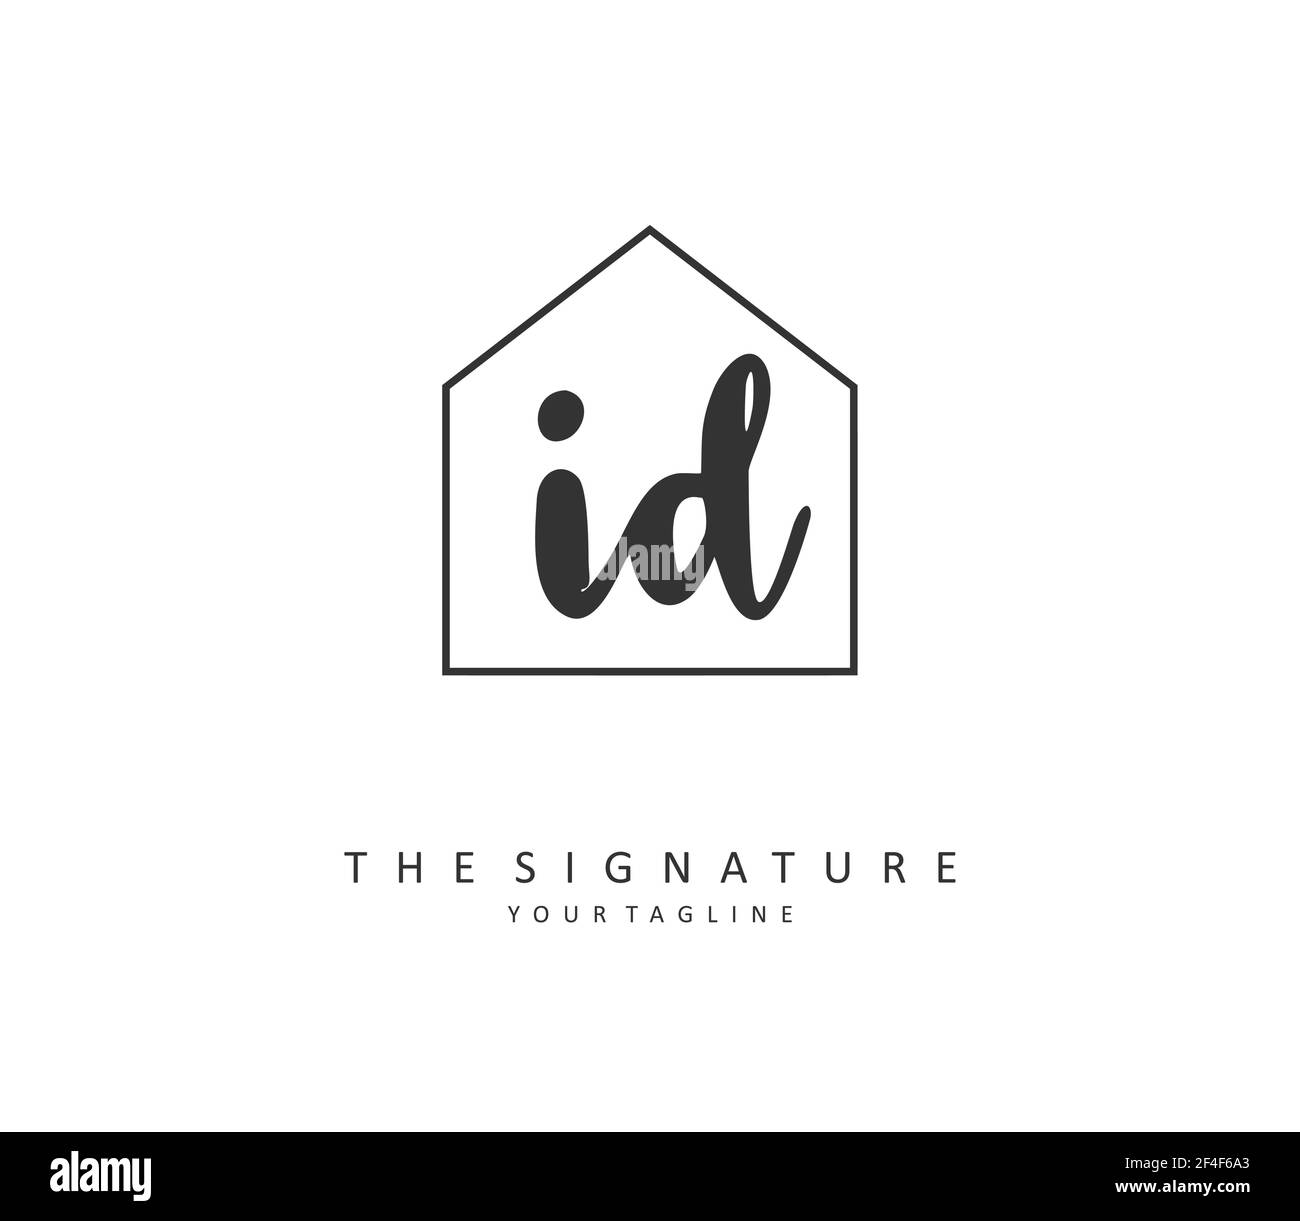 ID Initial letter handwriting and signature logo. A concept handwriting initial logo with template element. Stock Vector